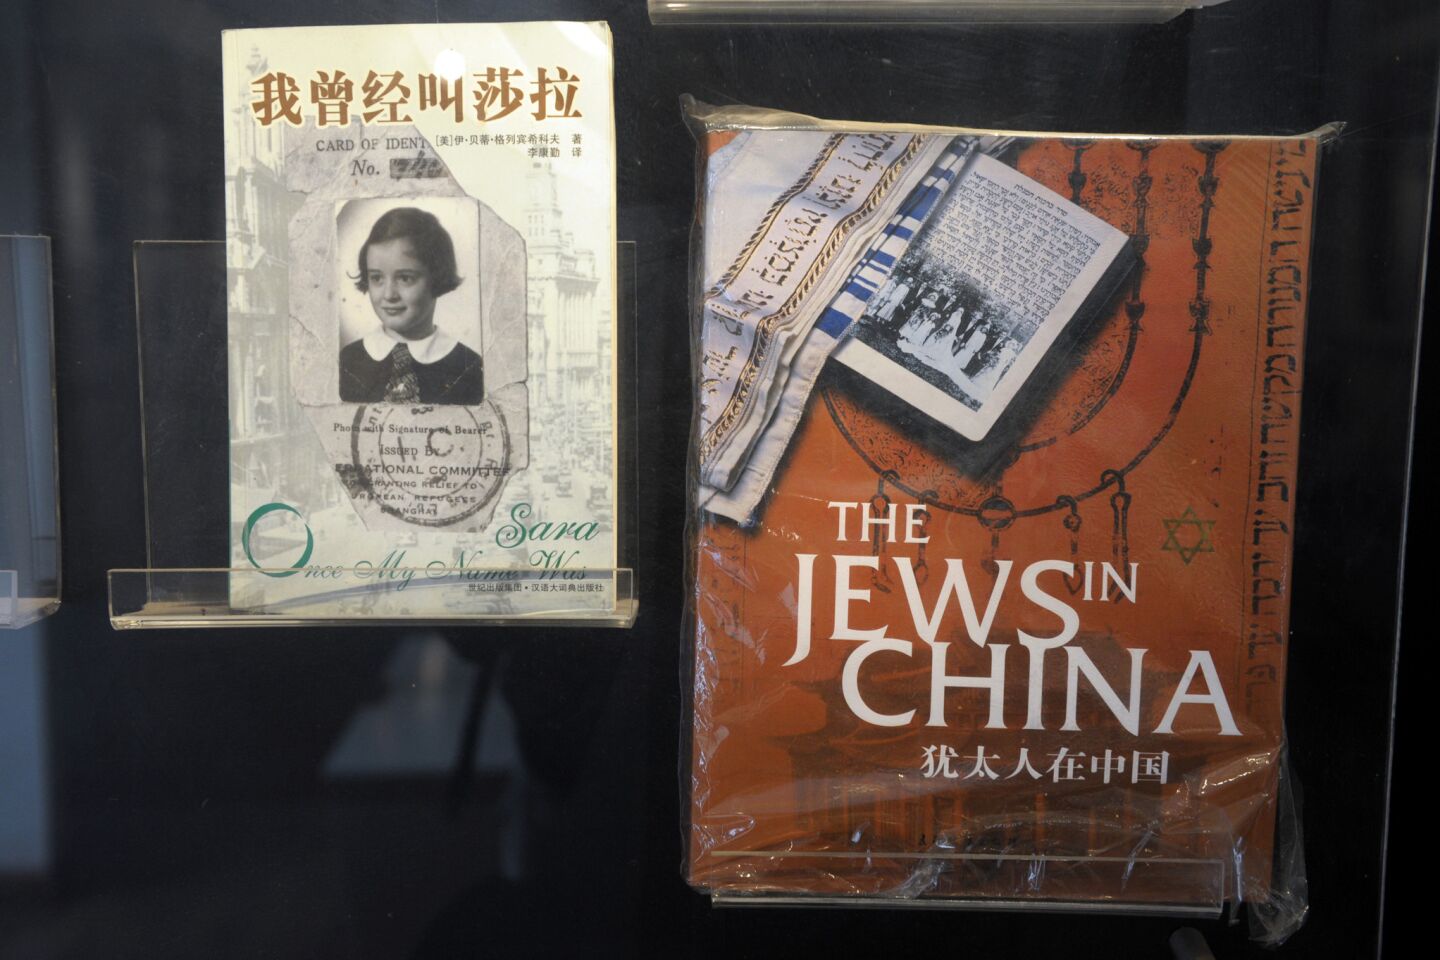 Shanghai, a haven for Jews during World War II